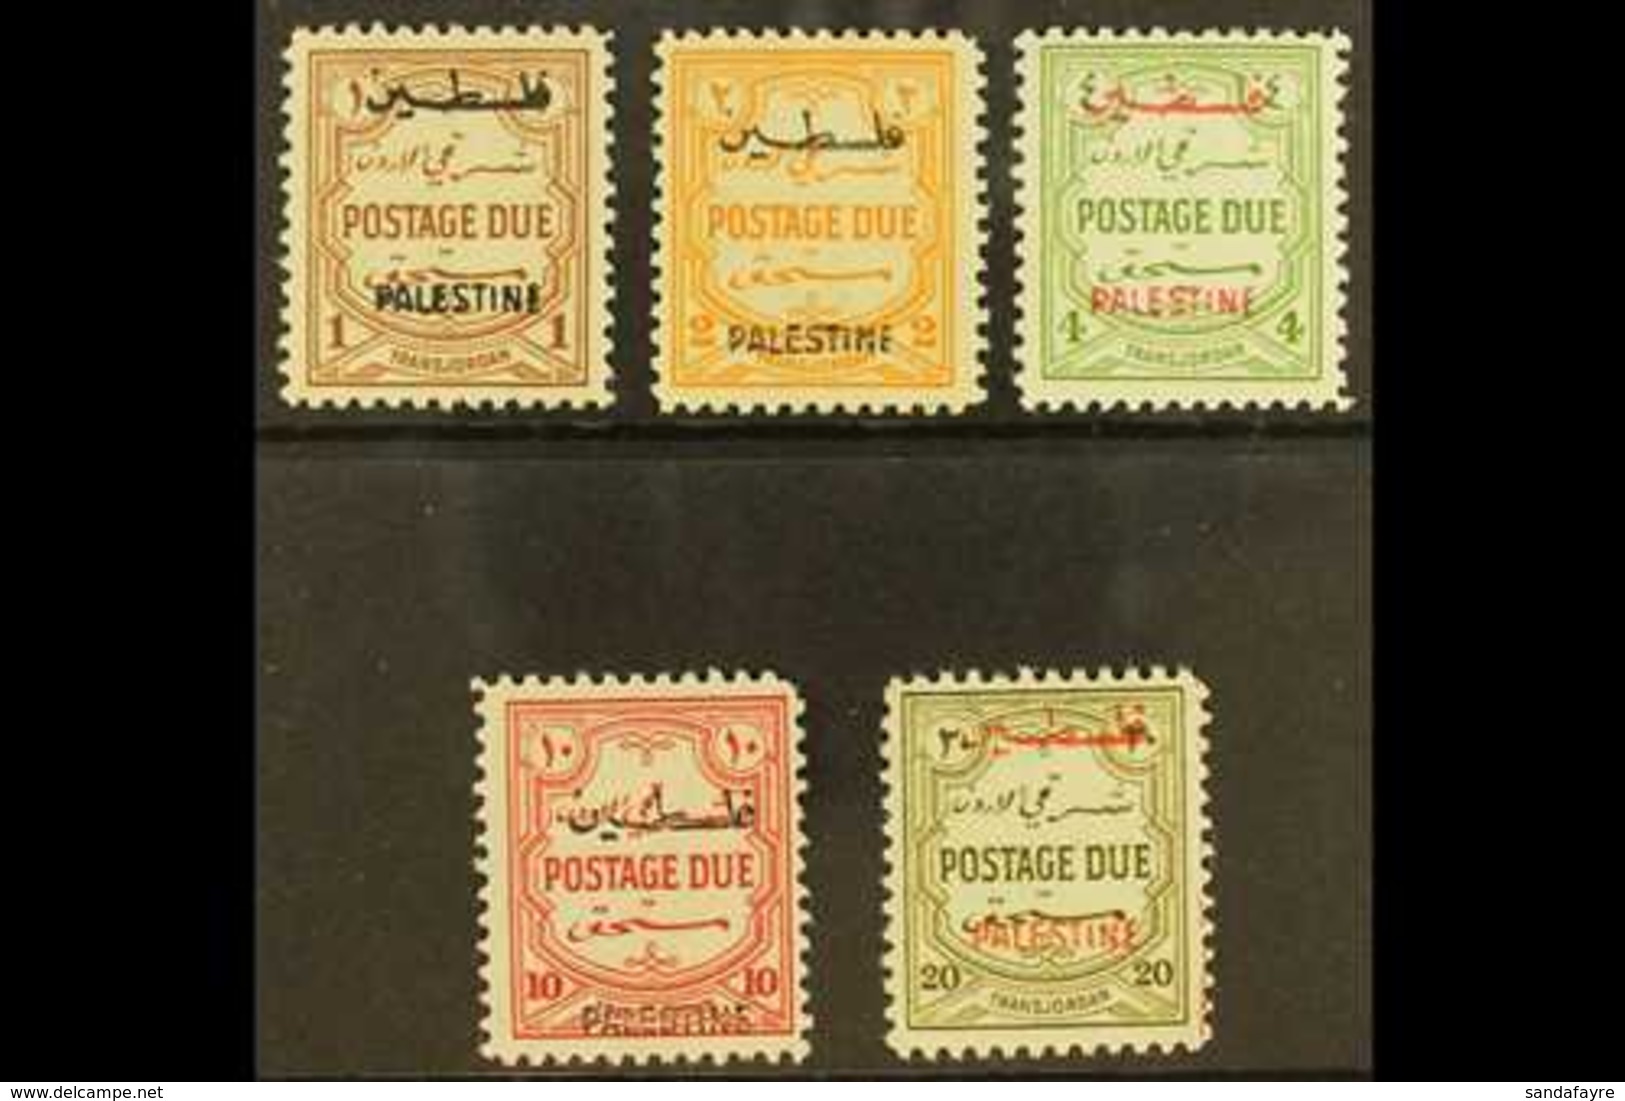 OCCUPATION OF PALESTINE  1948 Postage Due Set, Perf 12, Complete, SG PD25/9, Very Fine And Fresh Mint. (5 Stamps) For Mo - Jordanië